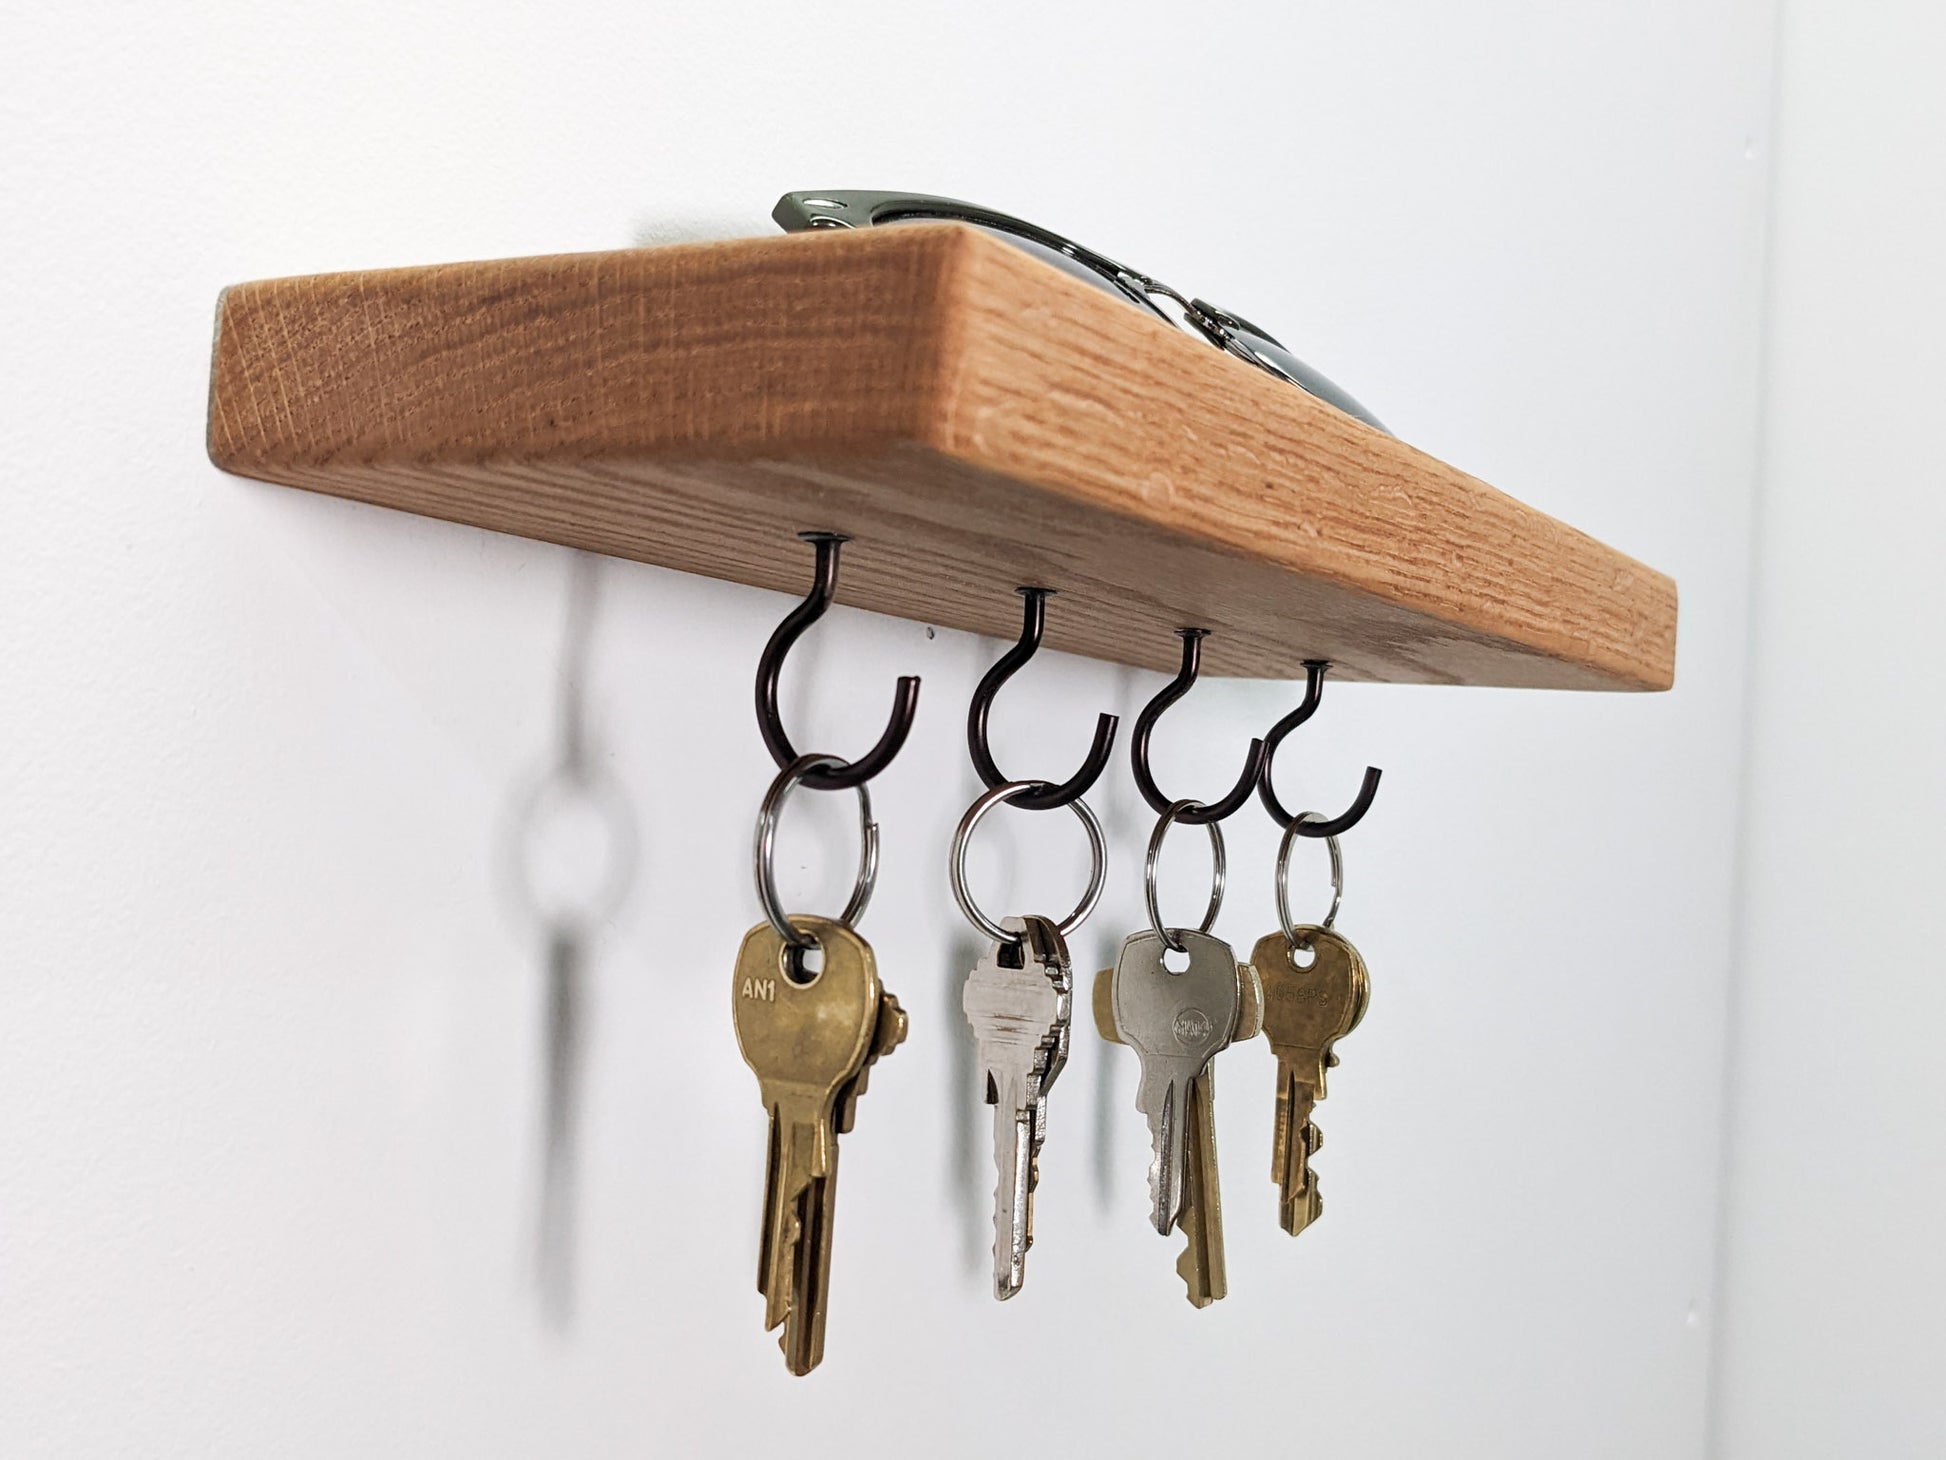 Four black key hooks hang securely from a wall-mounted floating oak shelf . Four keys are bronze, four are silver. The keys cast a slight shadow onto the white wall behind them. On top of the shelf sits a pair of sunglasses. 